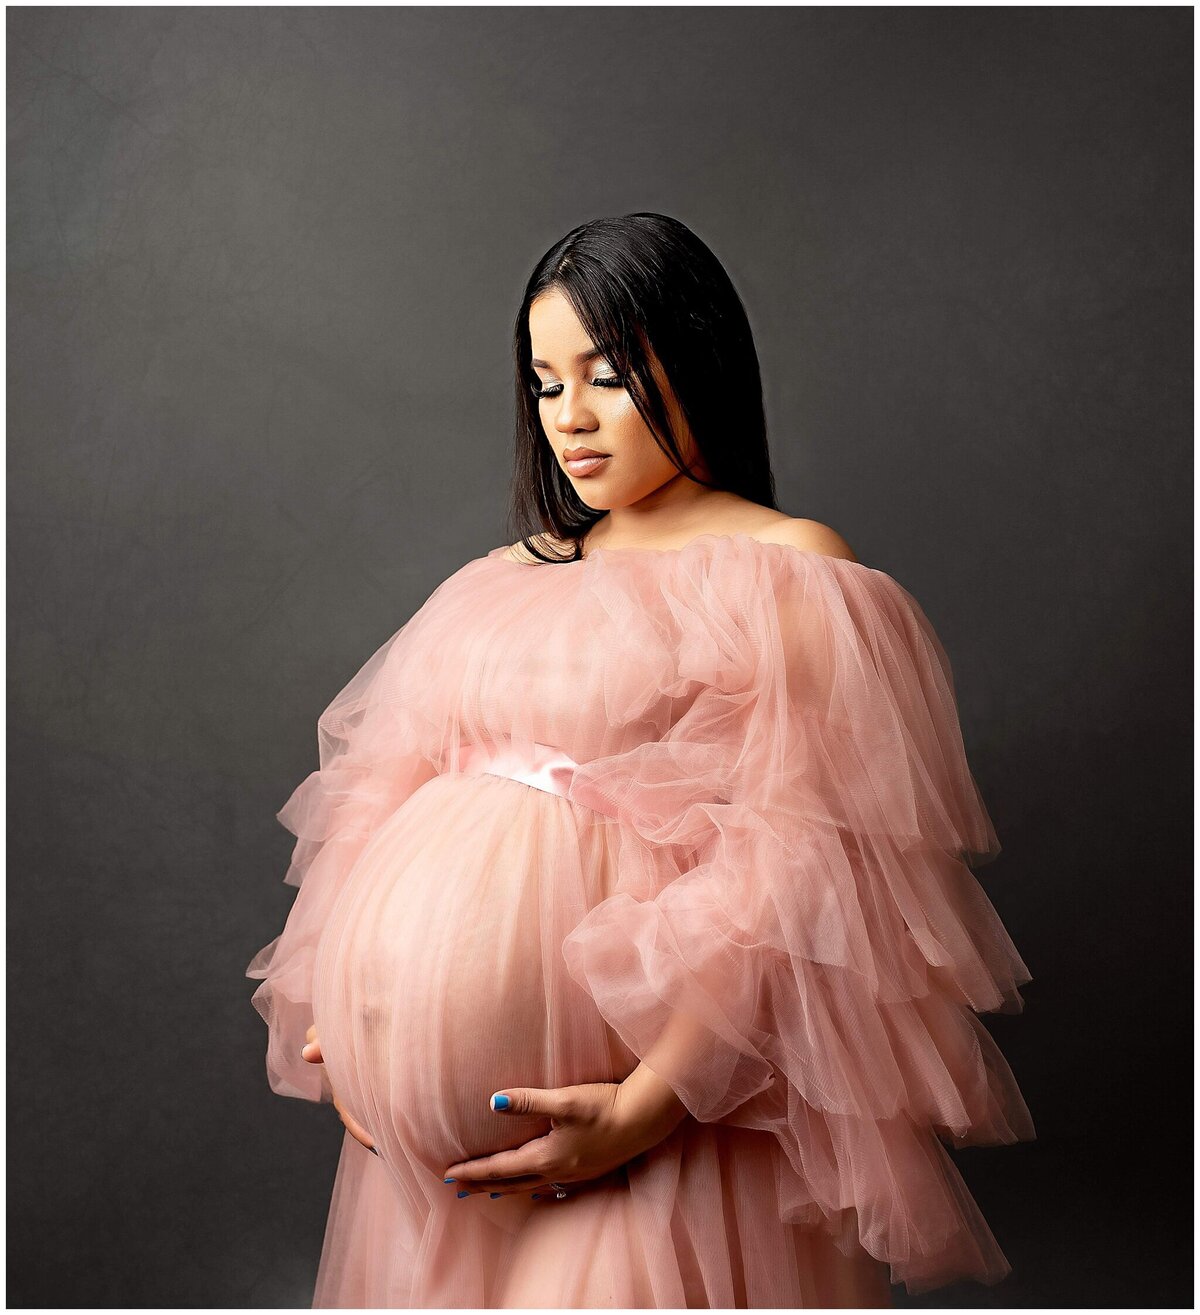 Pregnant woman wearing a beautiful  tulle dress poses with hand under belly and looking down slightly, showcasing her large belly.